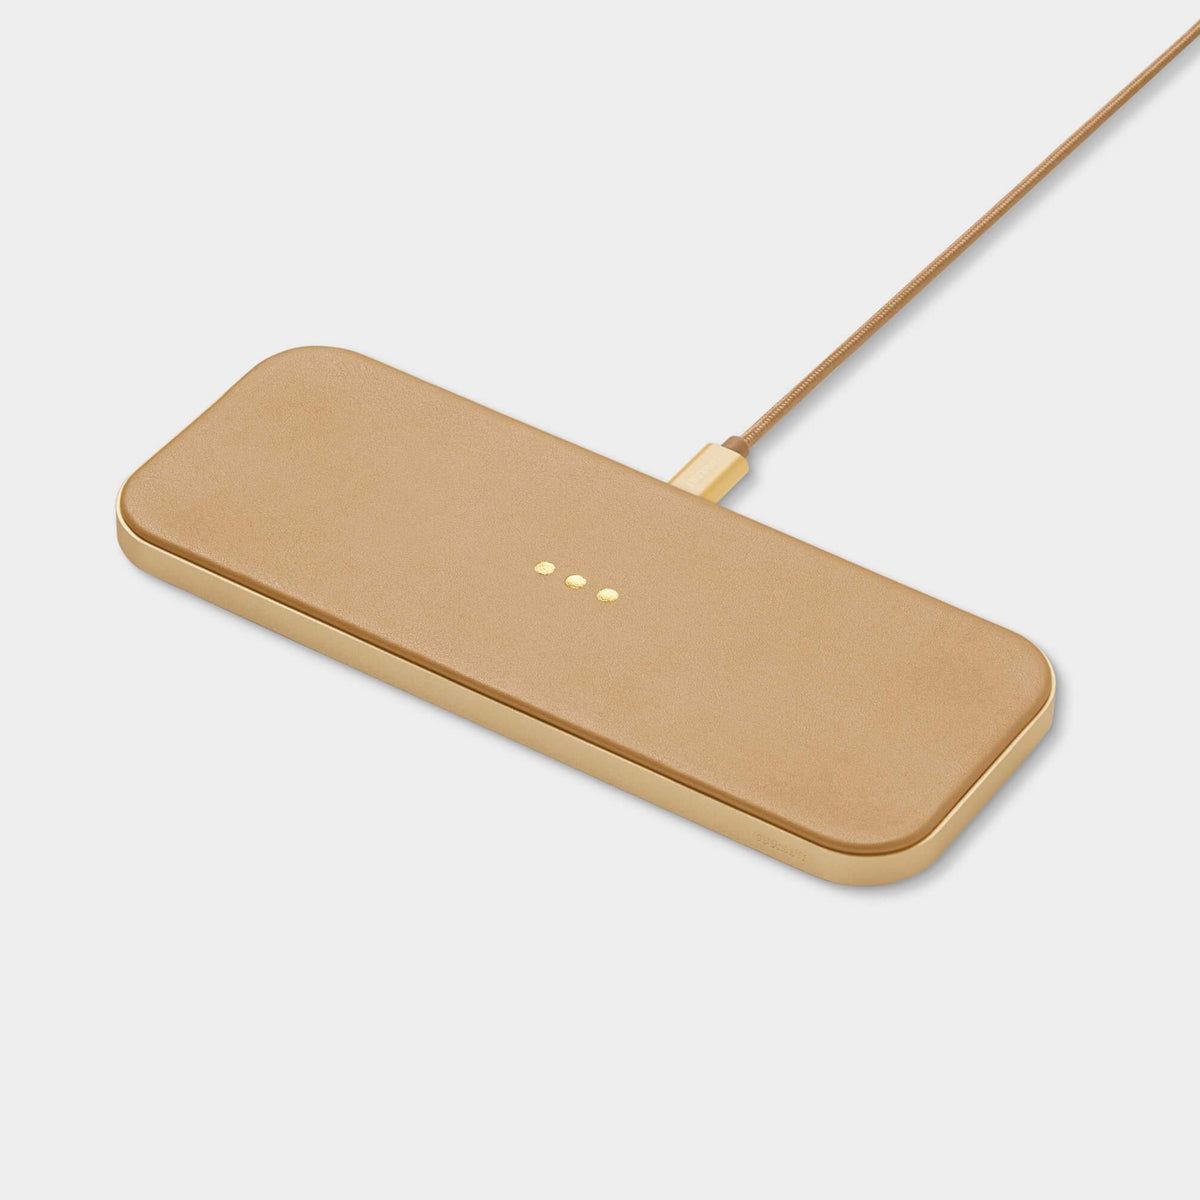 Catch 2 - Fast Wireless Phone Charger in Cortado